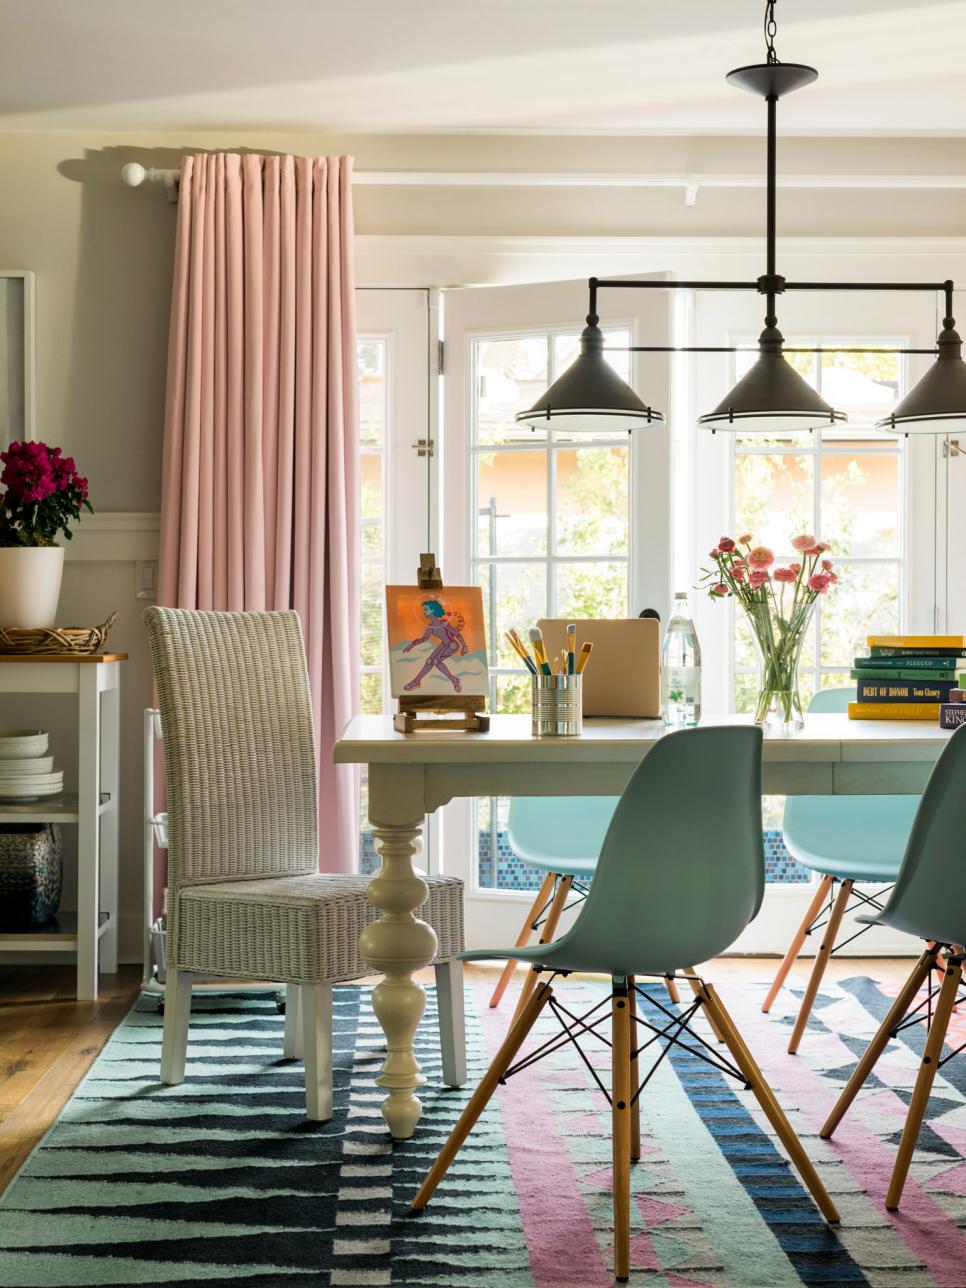 Turn Your Dining Room Into a Family-Friendly Multipurpose ...
